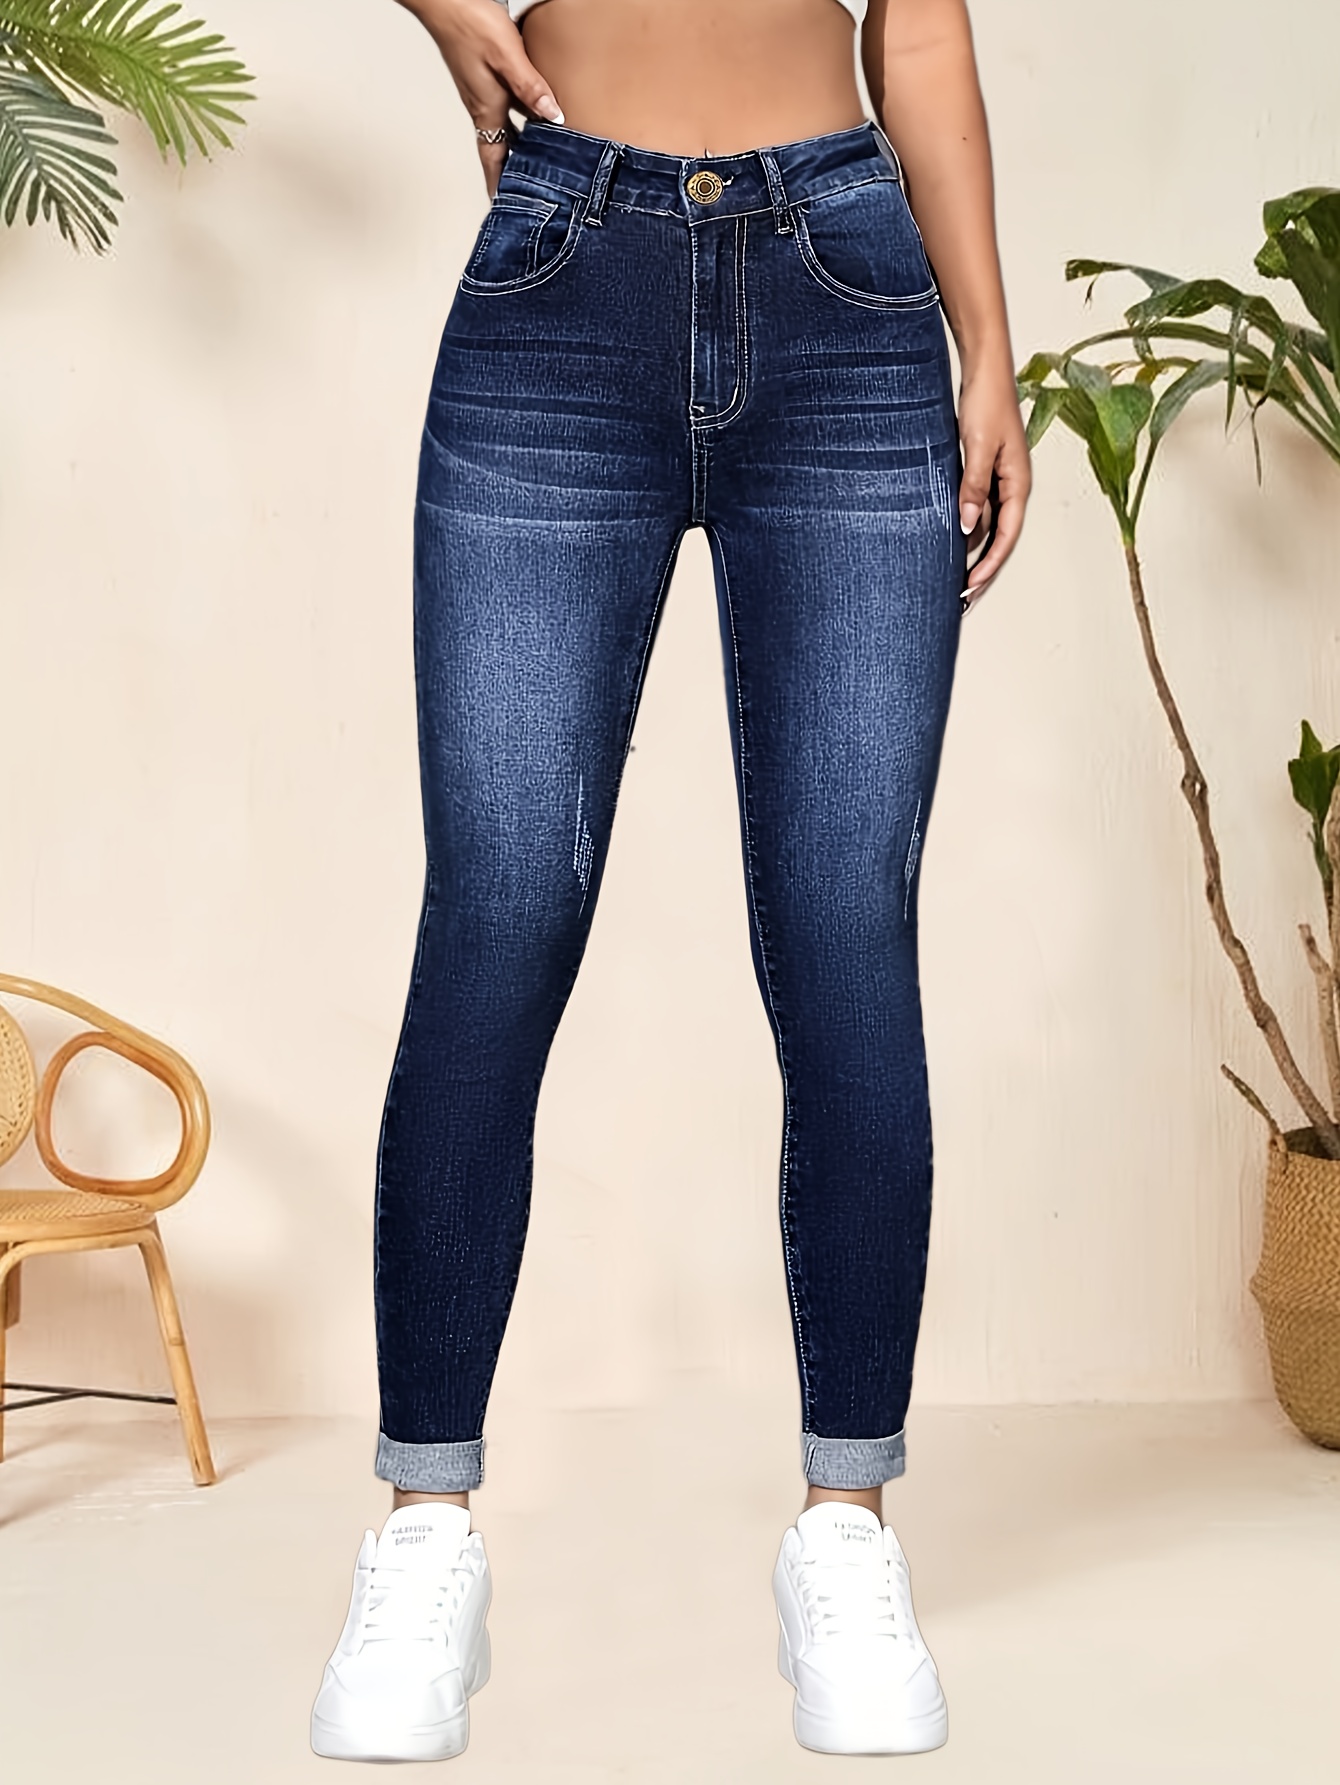 Double Button Ripped Skinny Jeans, High Rise Washed Blue Stretchy Denim  Pants, Women's Denim Jeans & Clothing